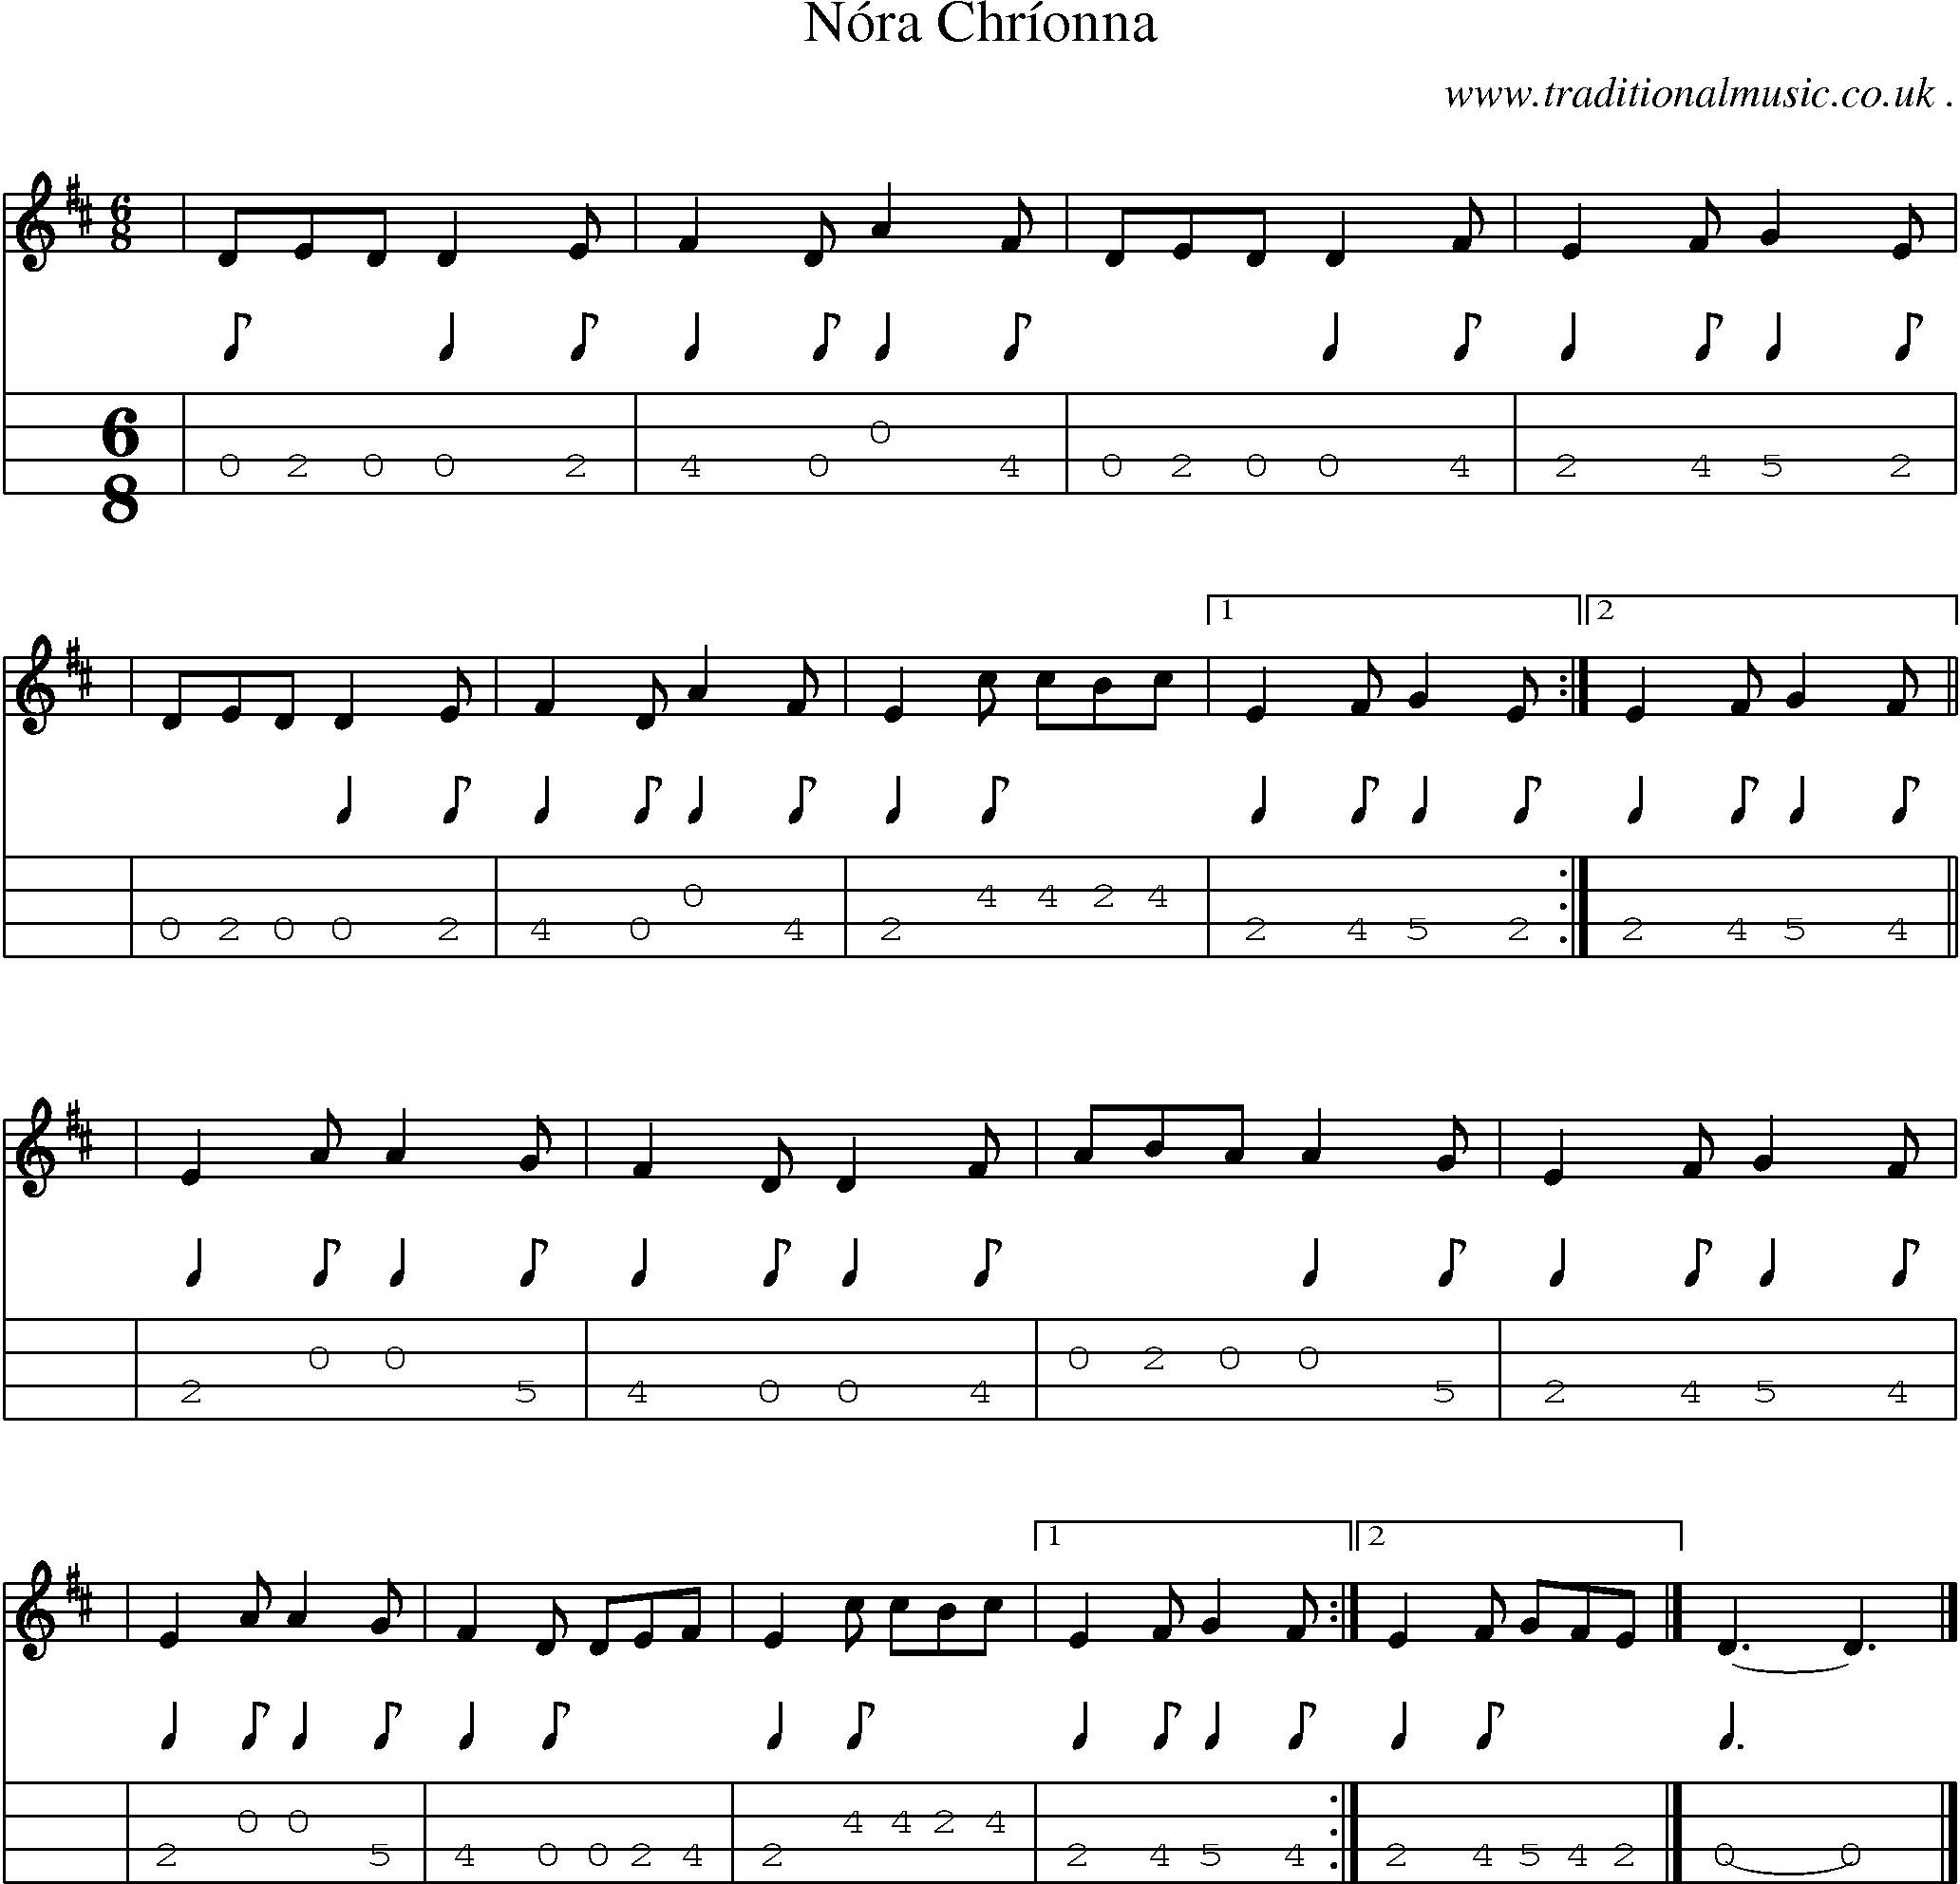 Sheet-music  score, Chords and Mandolin Tabs for Nora Chrionna